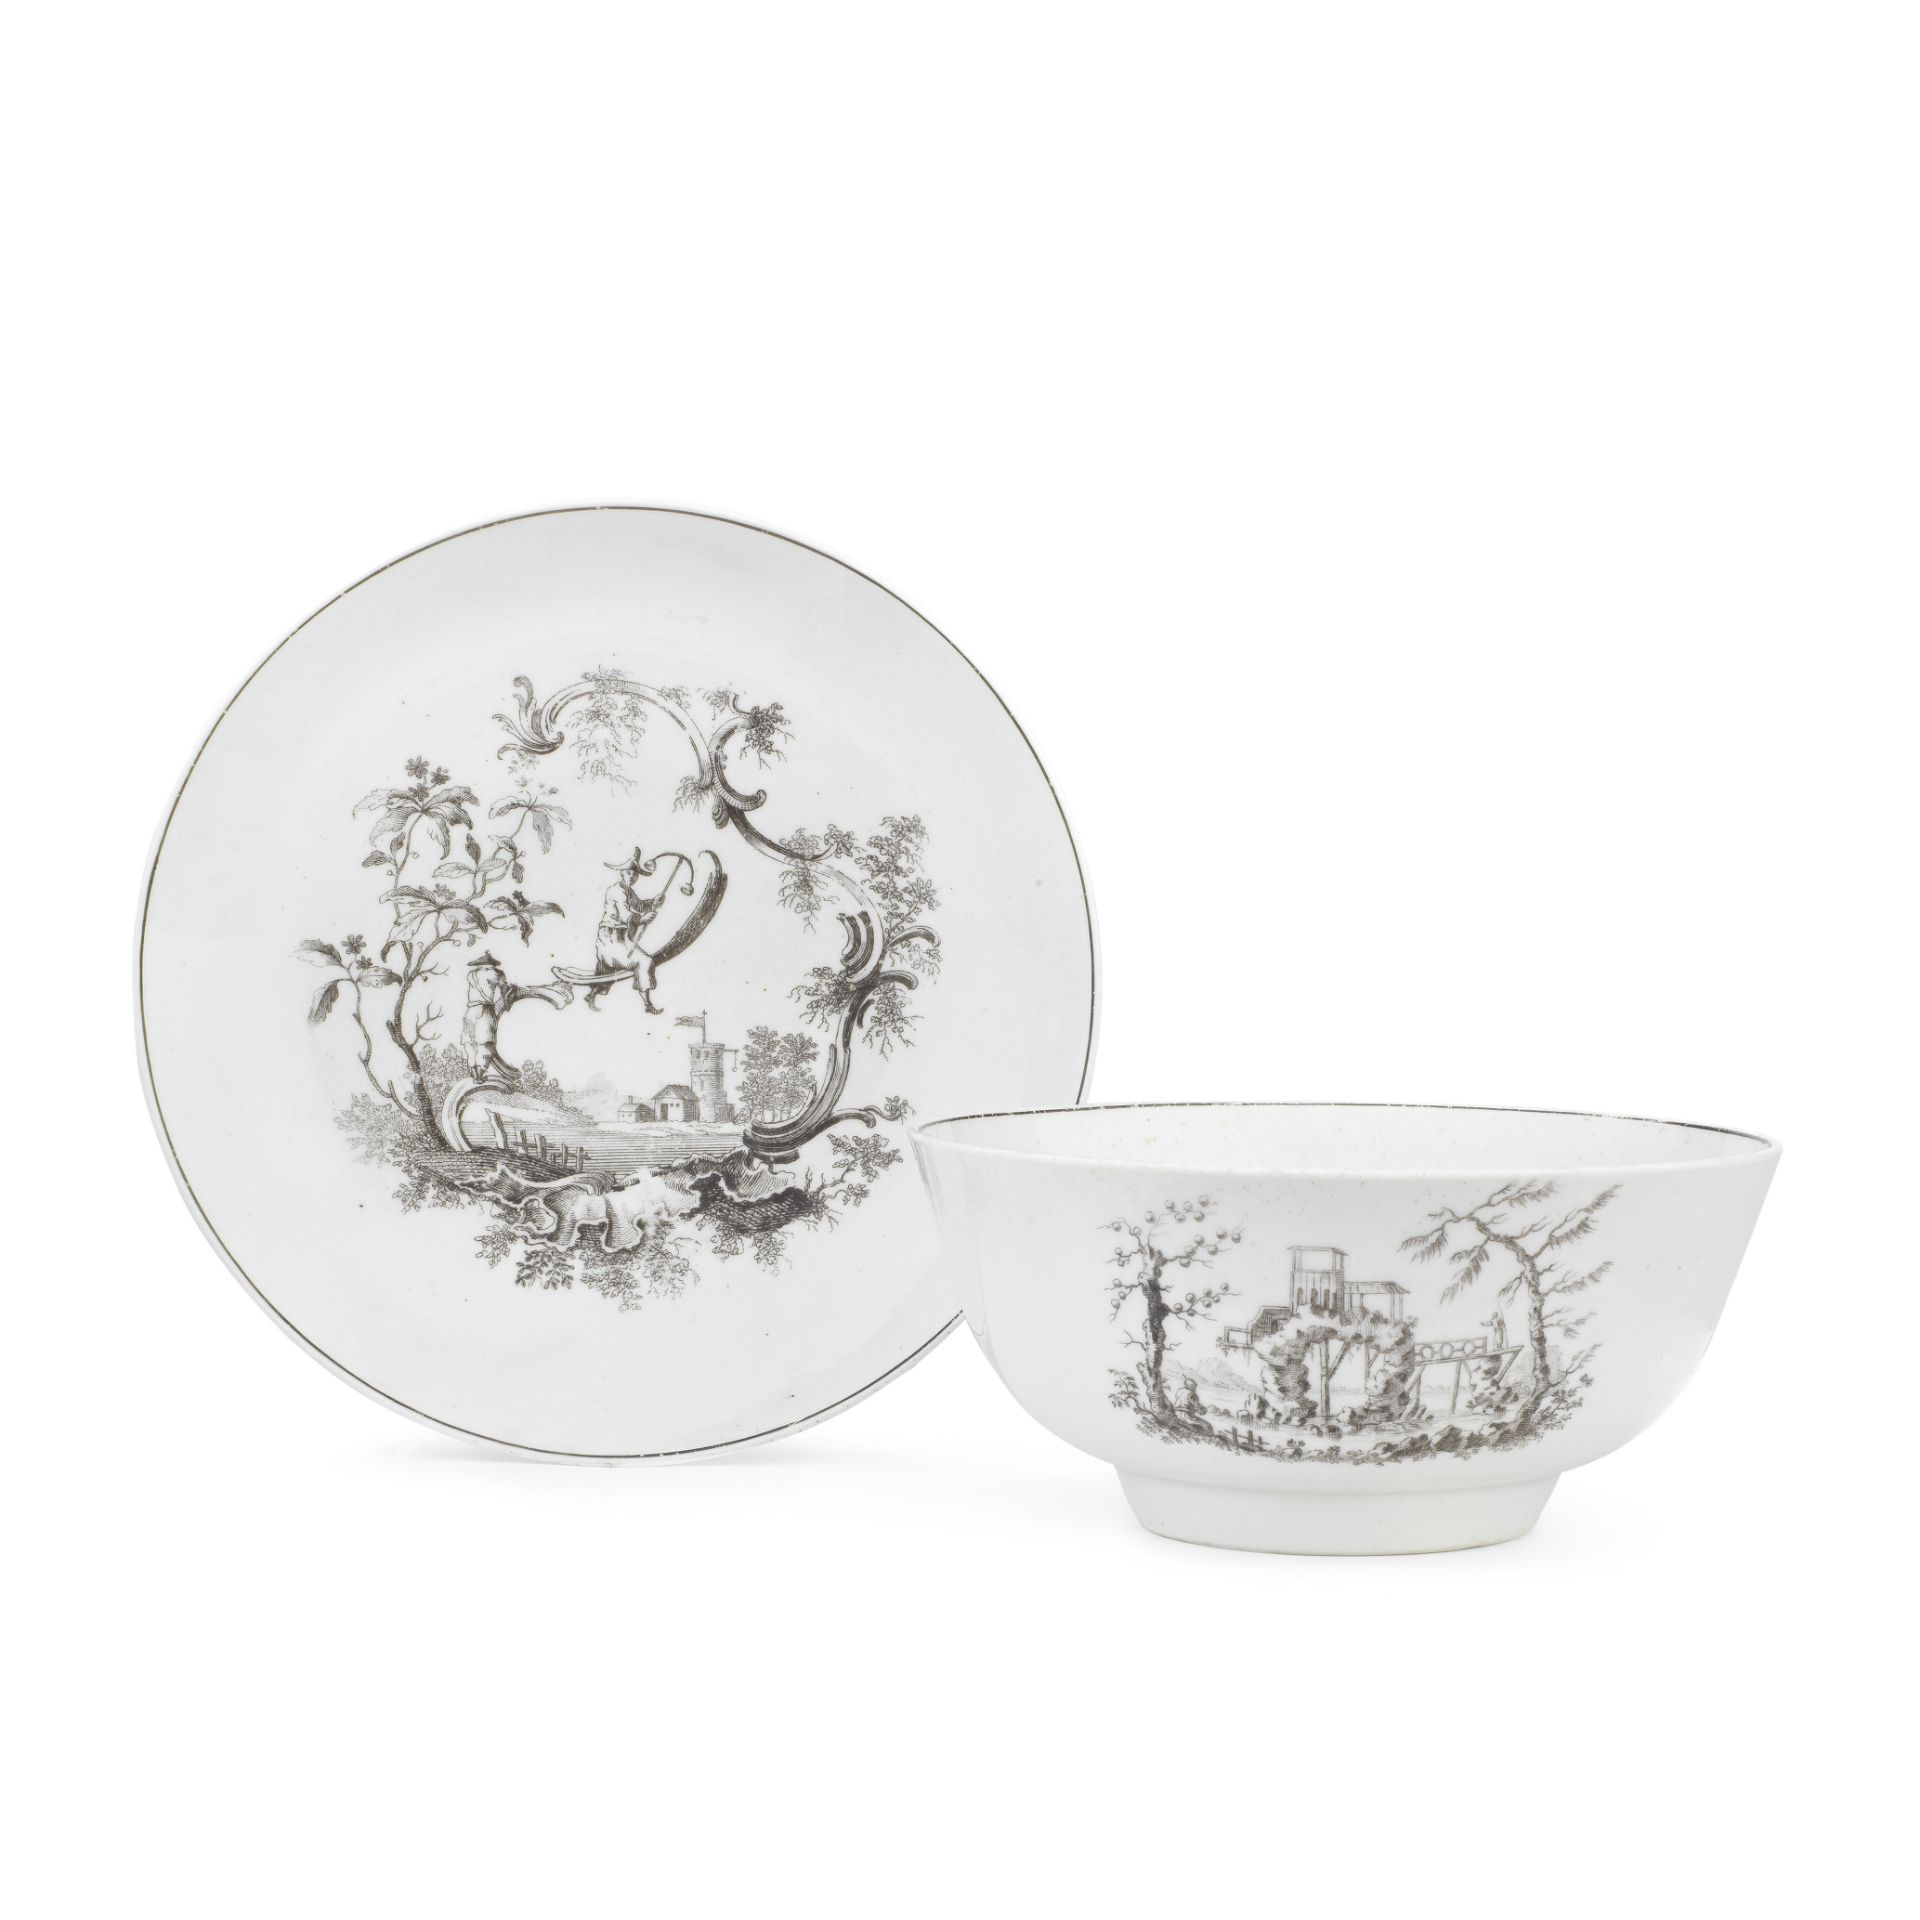 A Worcester saucer dish and slop bowl, circa 1756-60